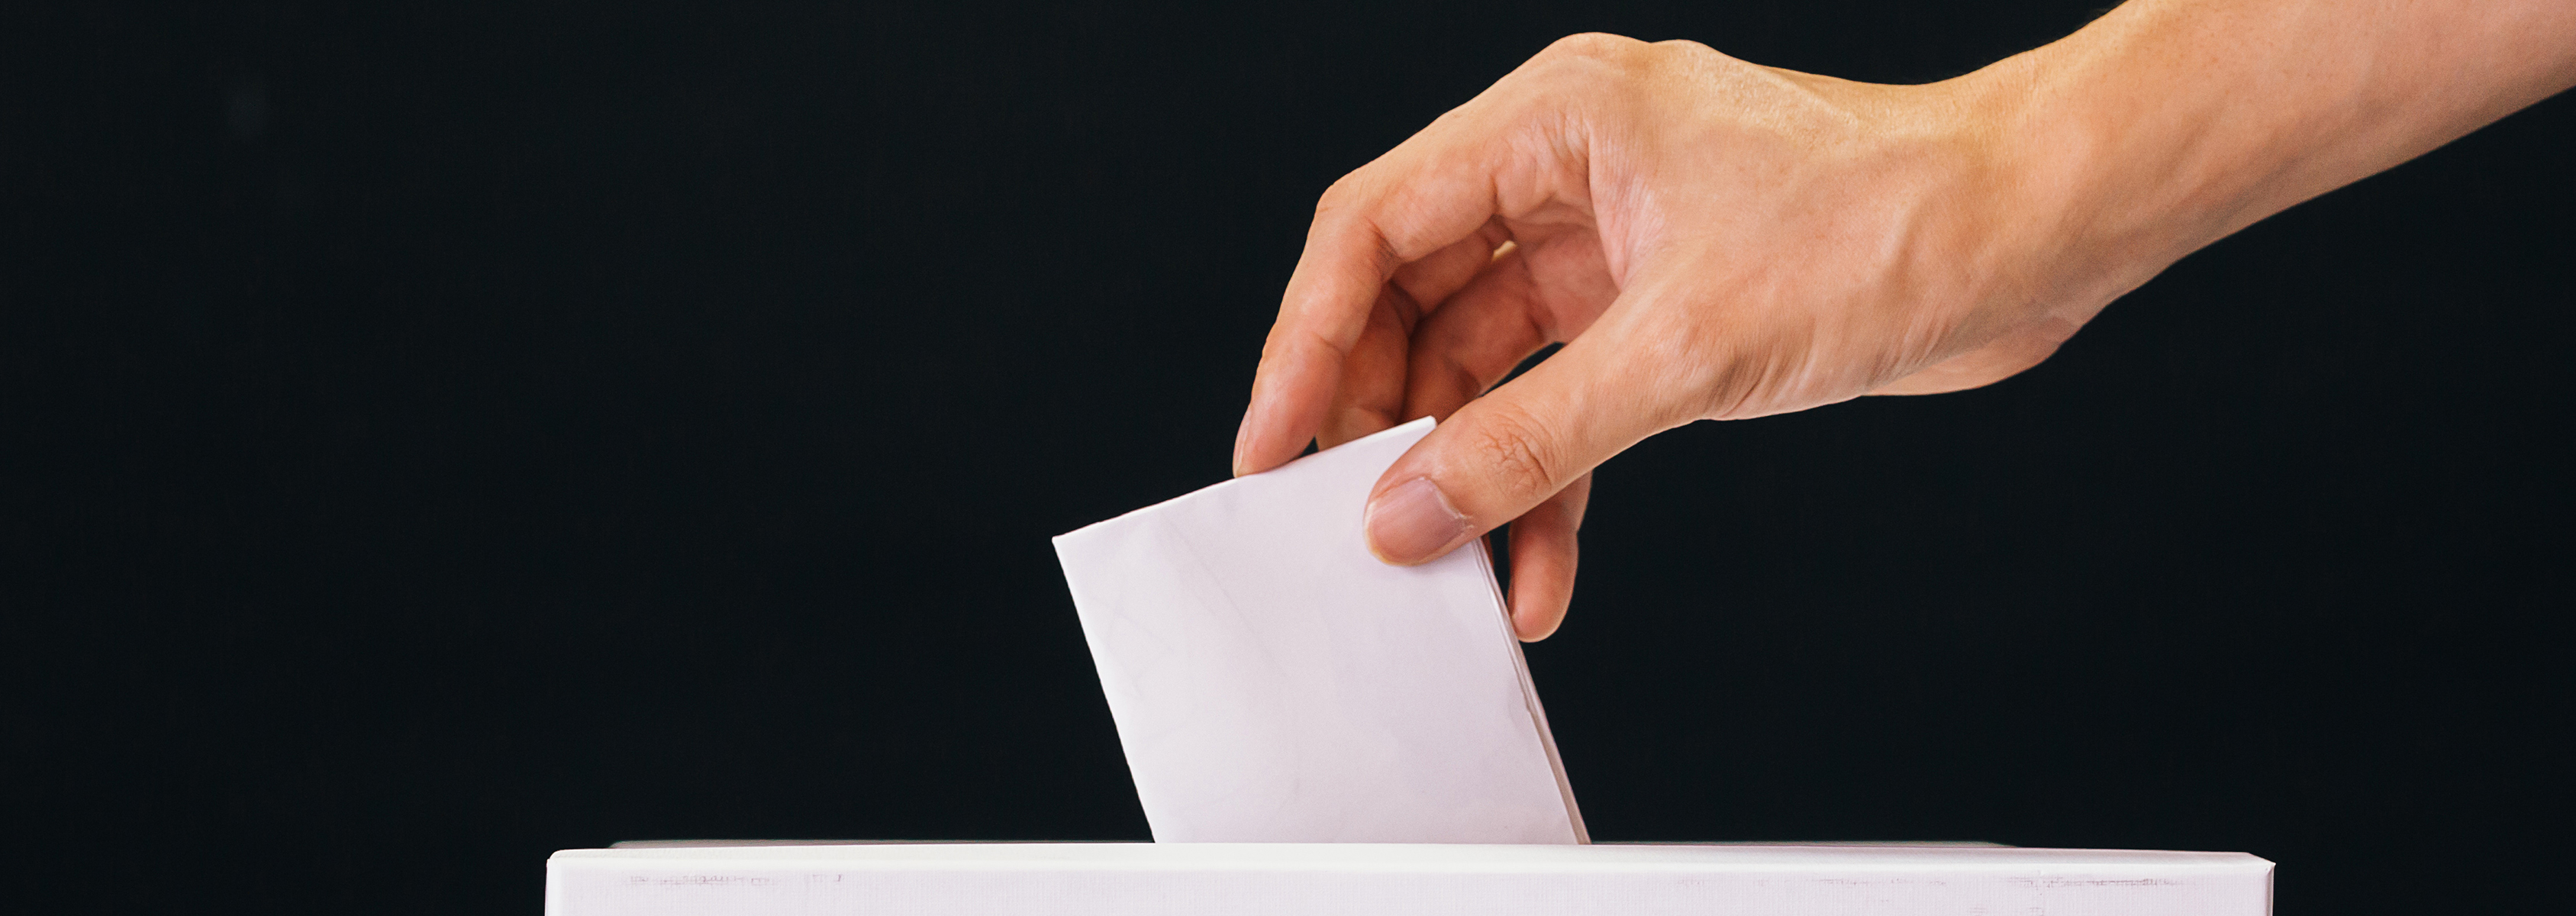 Hand Placing a piece of paper into a ballot box